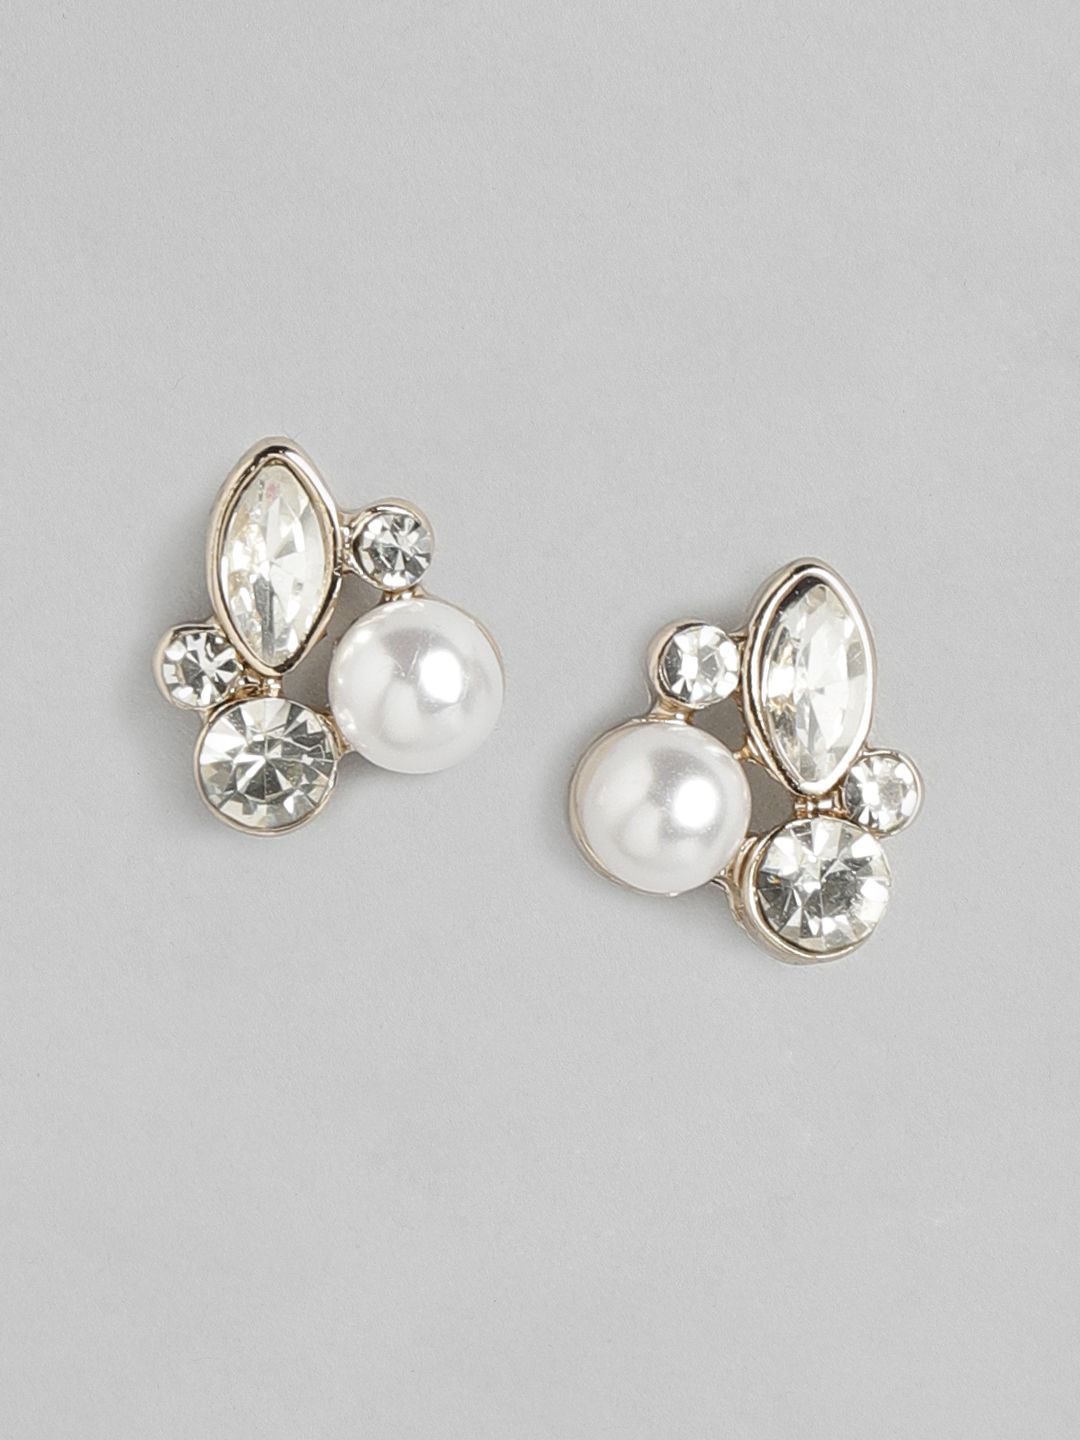 Forever New Gold-Plated White Floral Studs Earrings Price in India